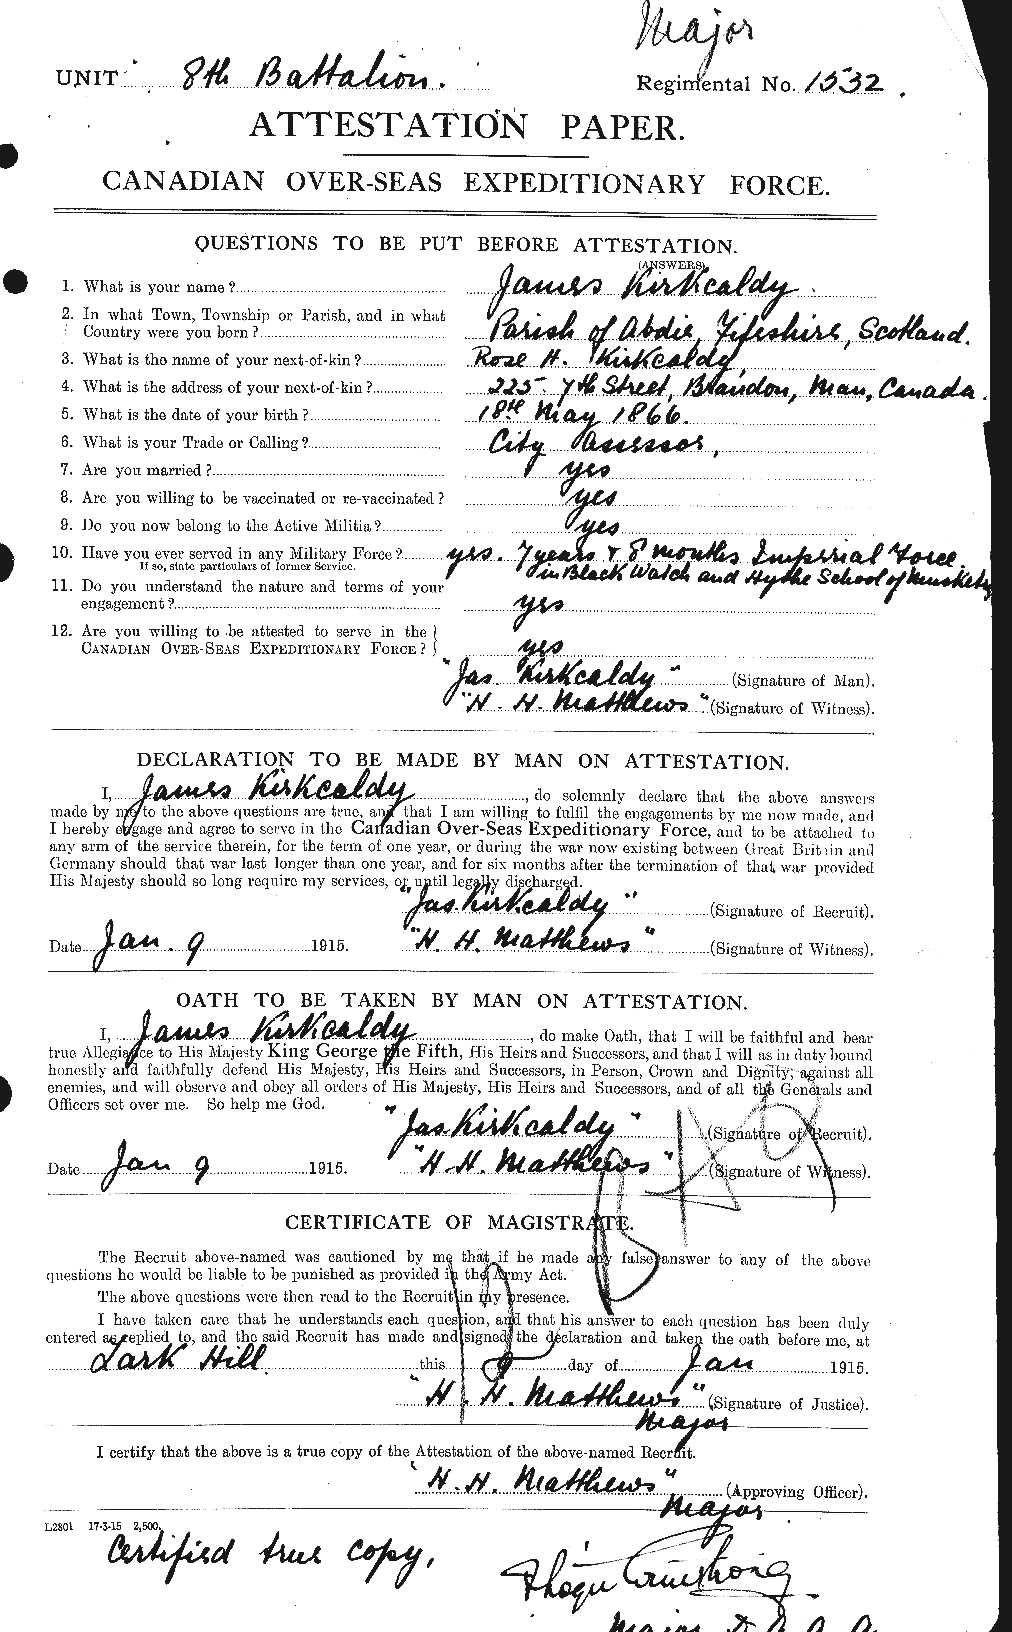 Personnel Records of the First World War - CEF 441001a